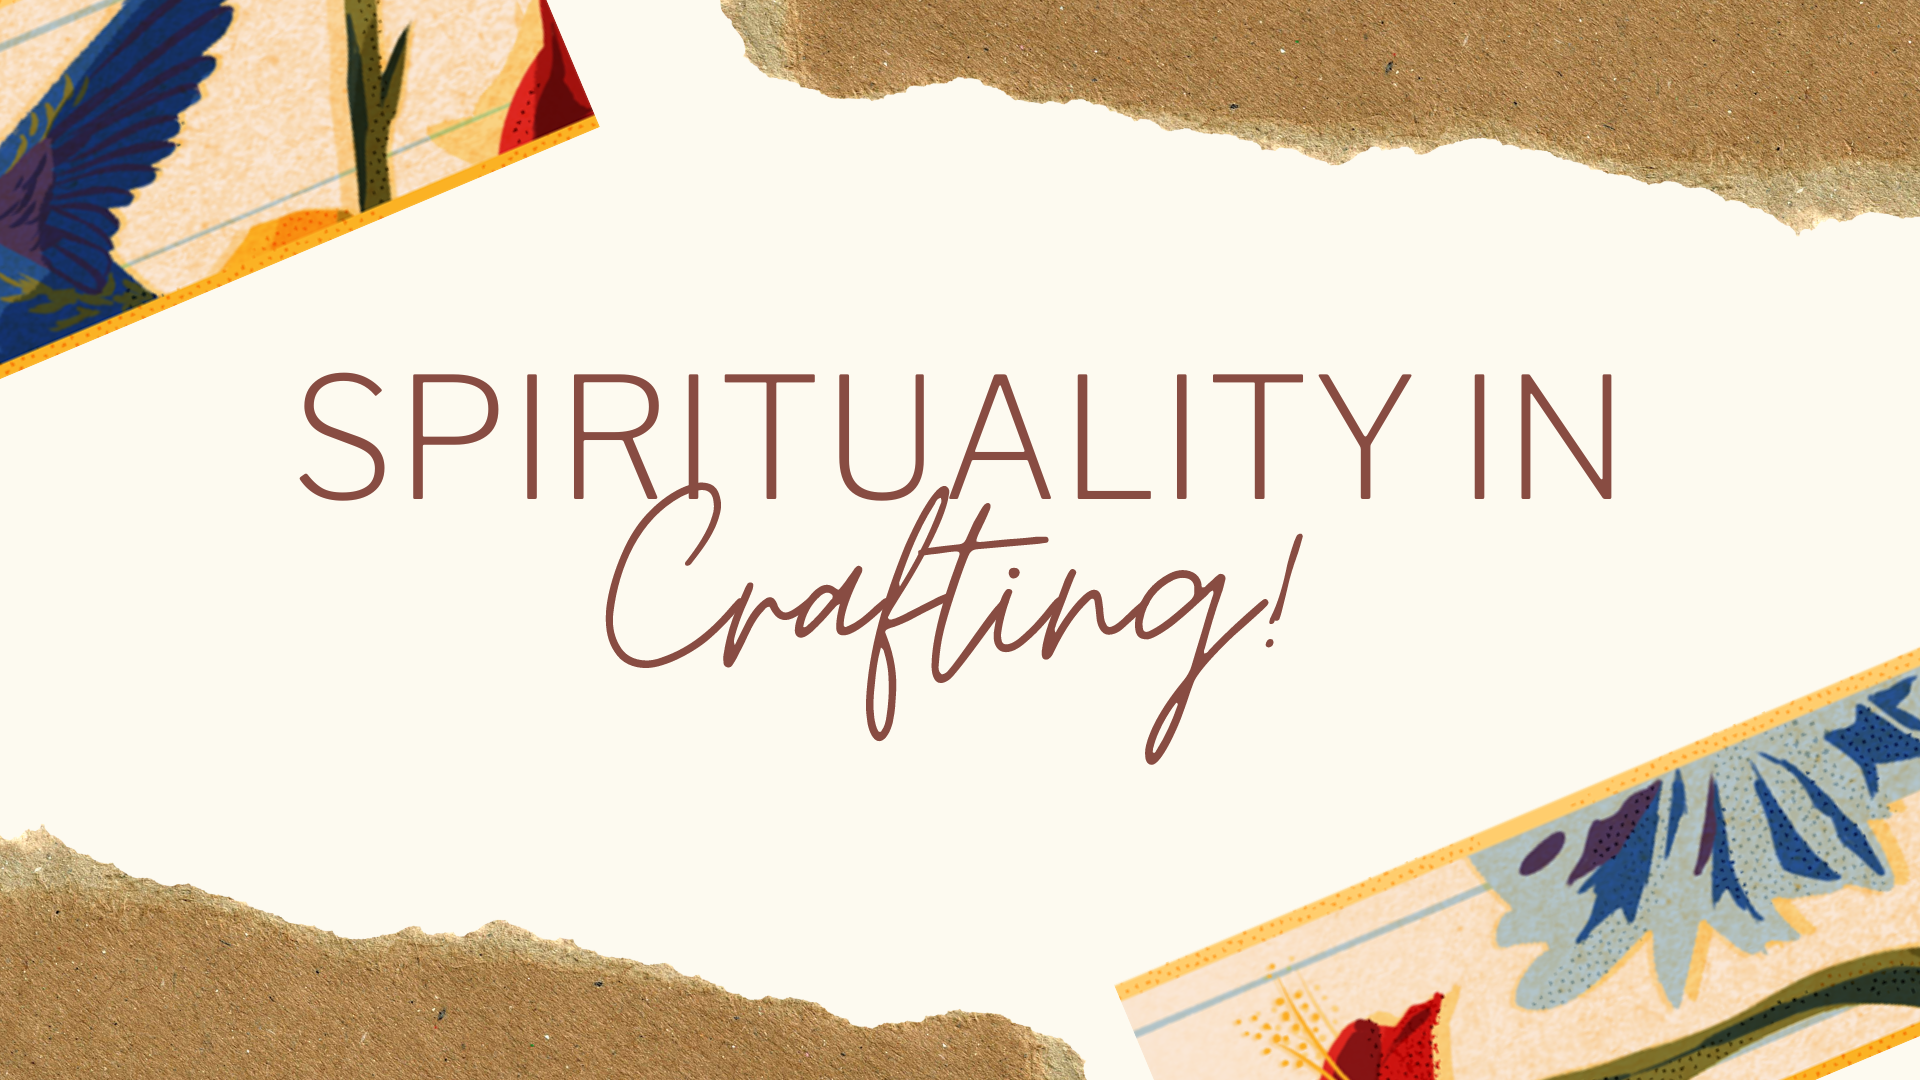 Spirituality in Crafting